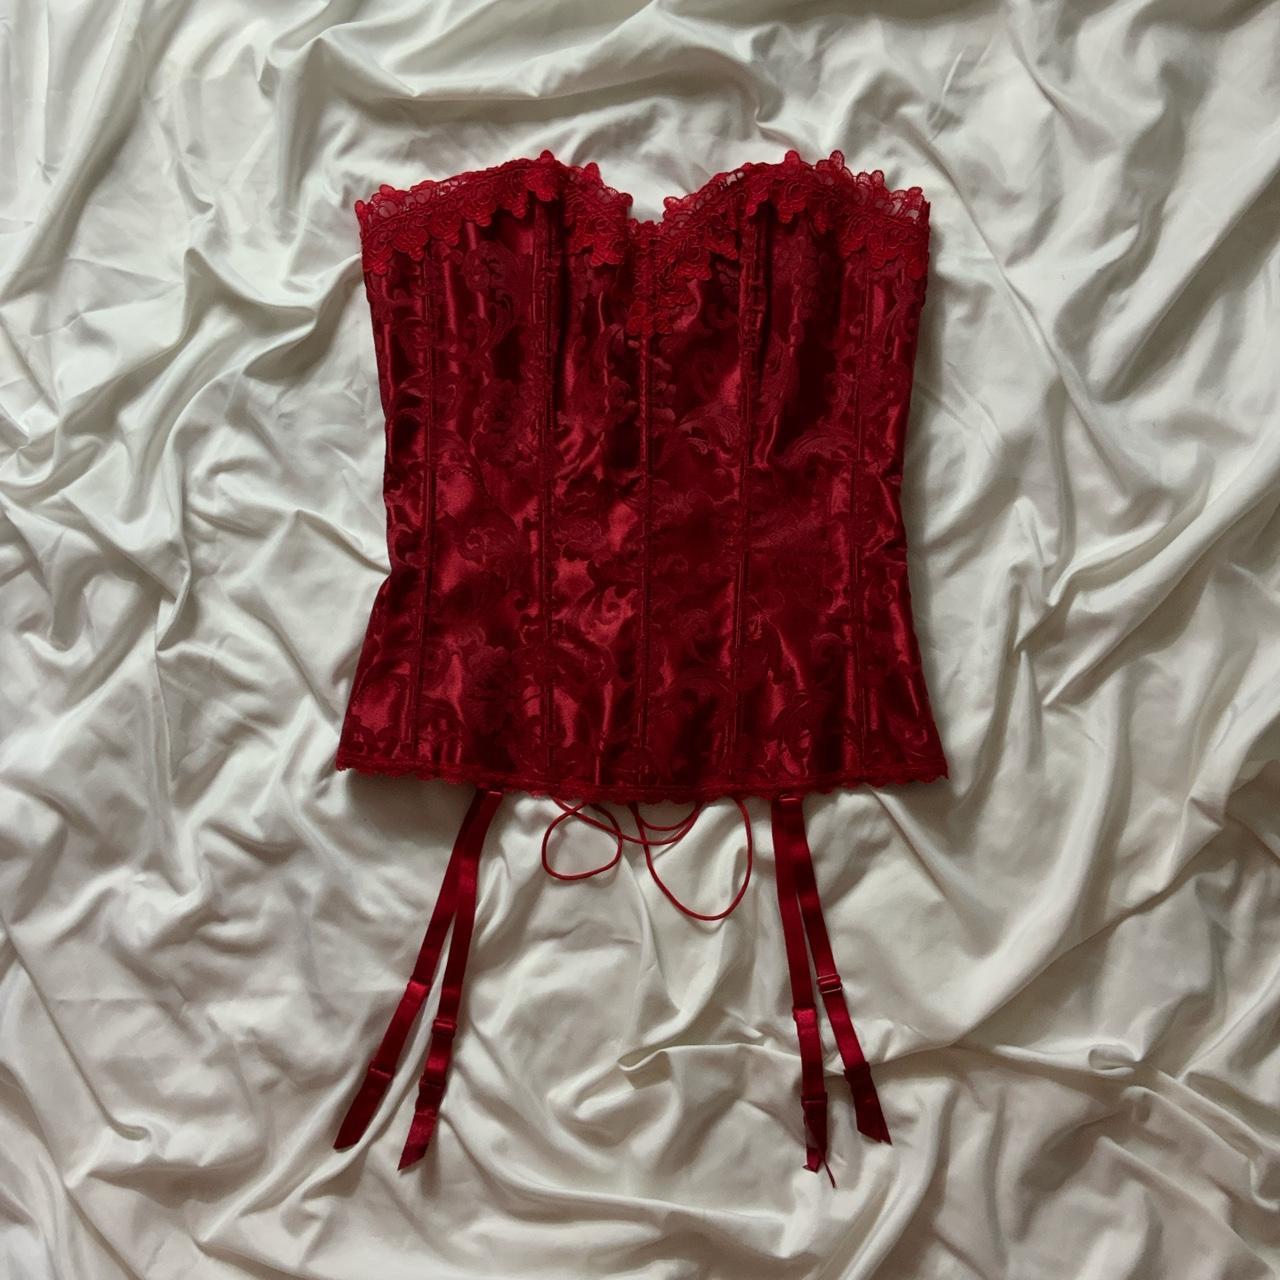 Frederick's of Hollywood Women's Red Corset | Depop